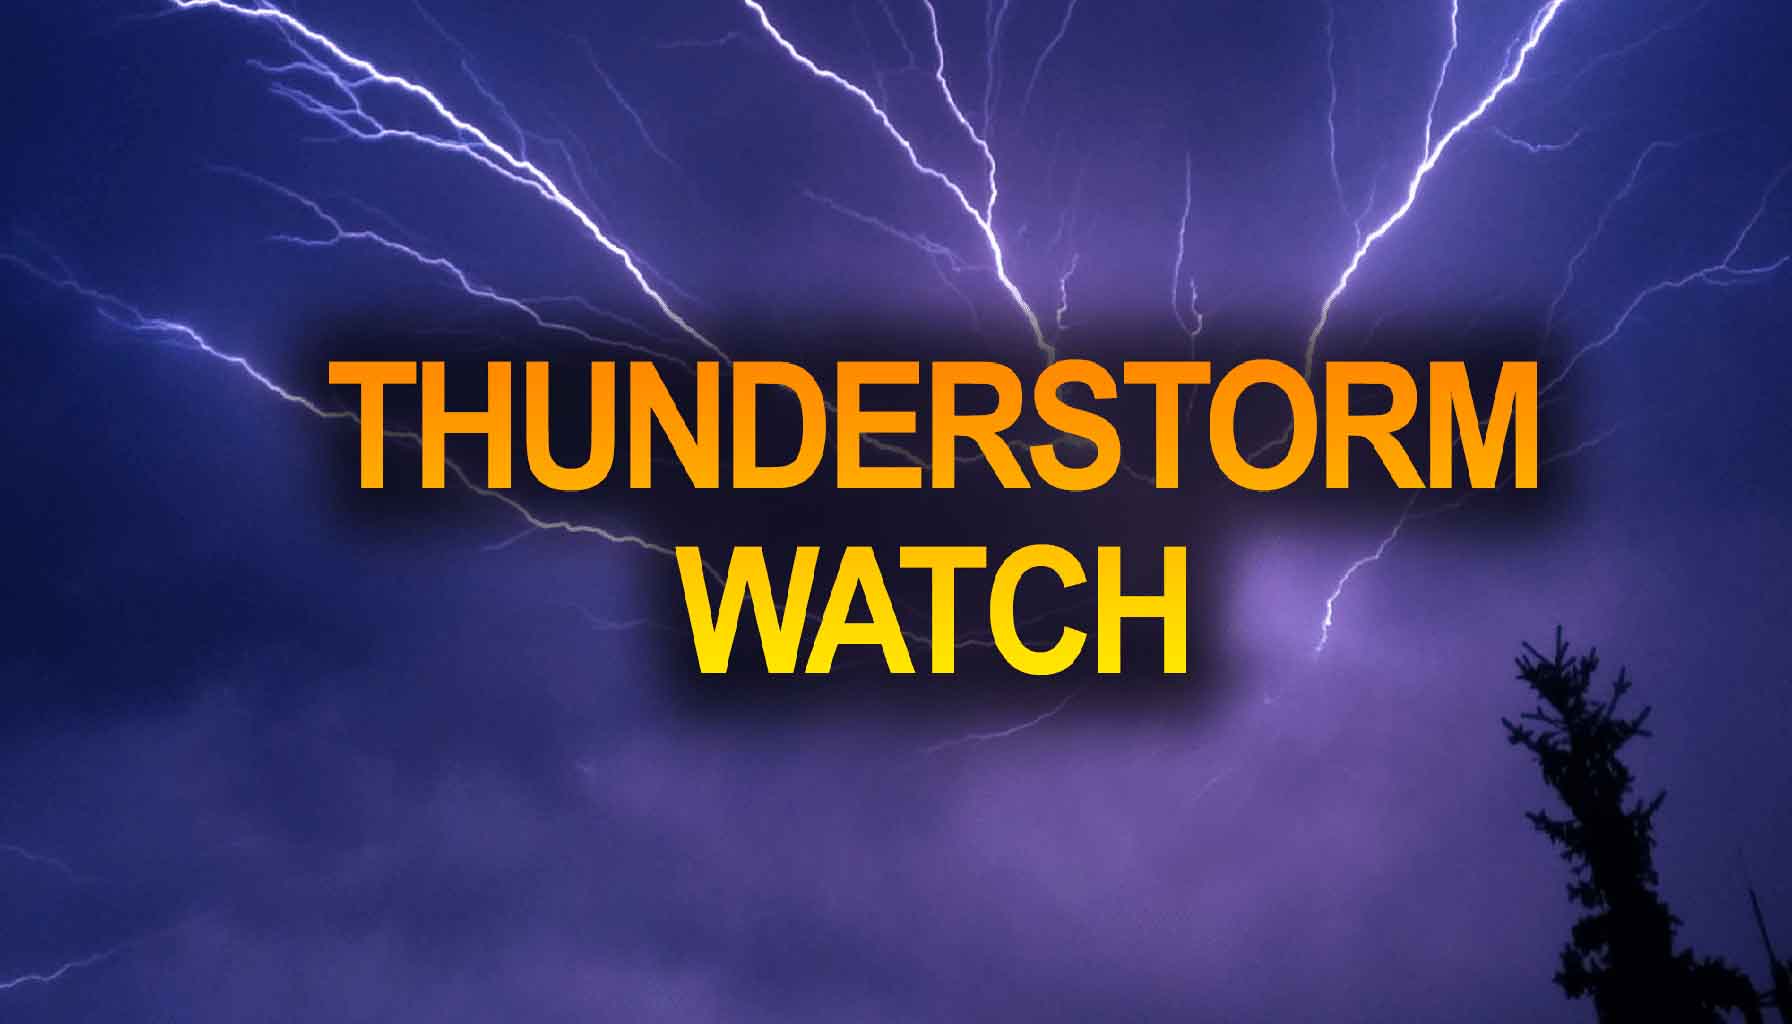 Severe Thunderstorm Watch news graphic